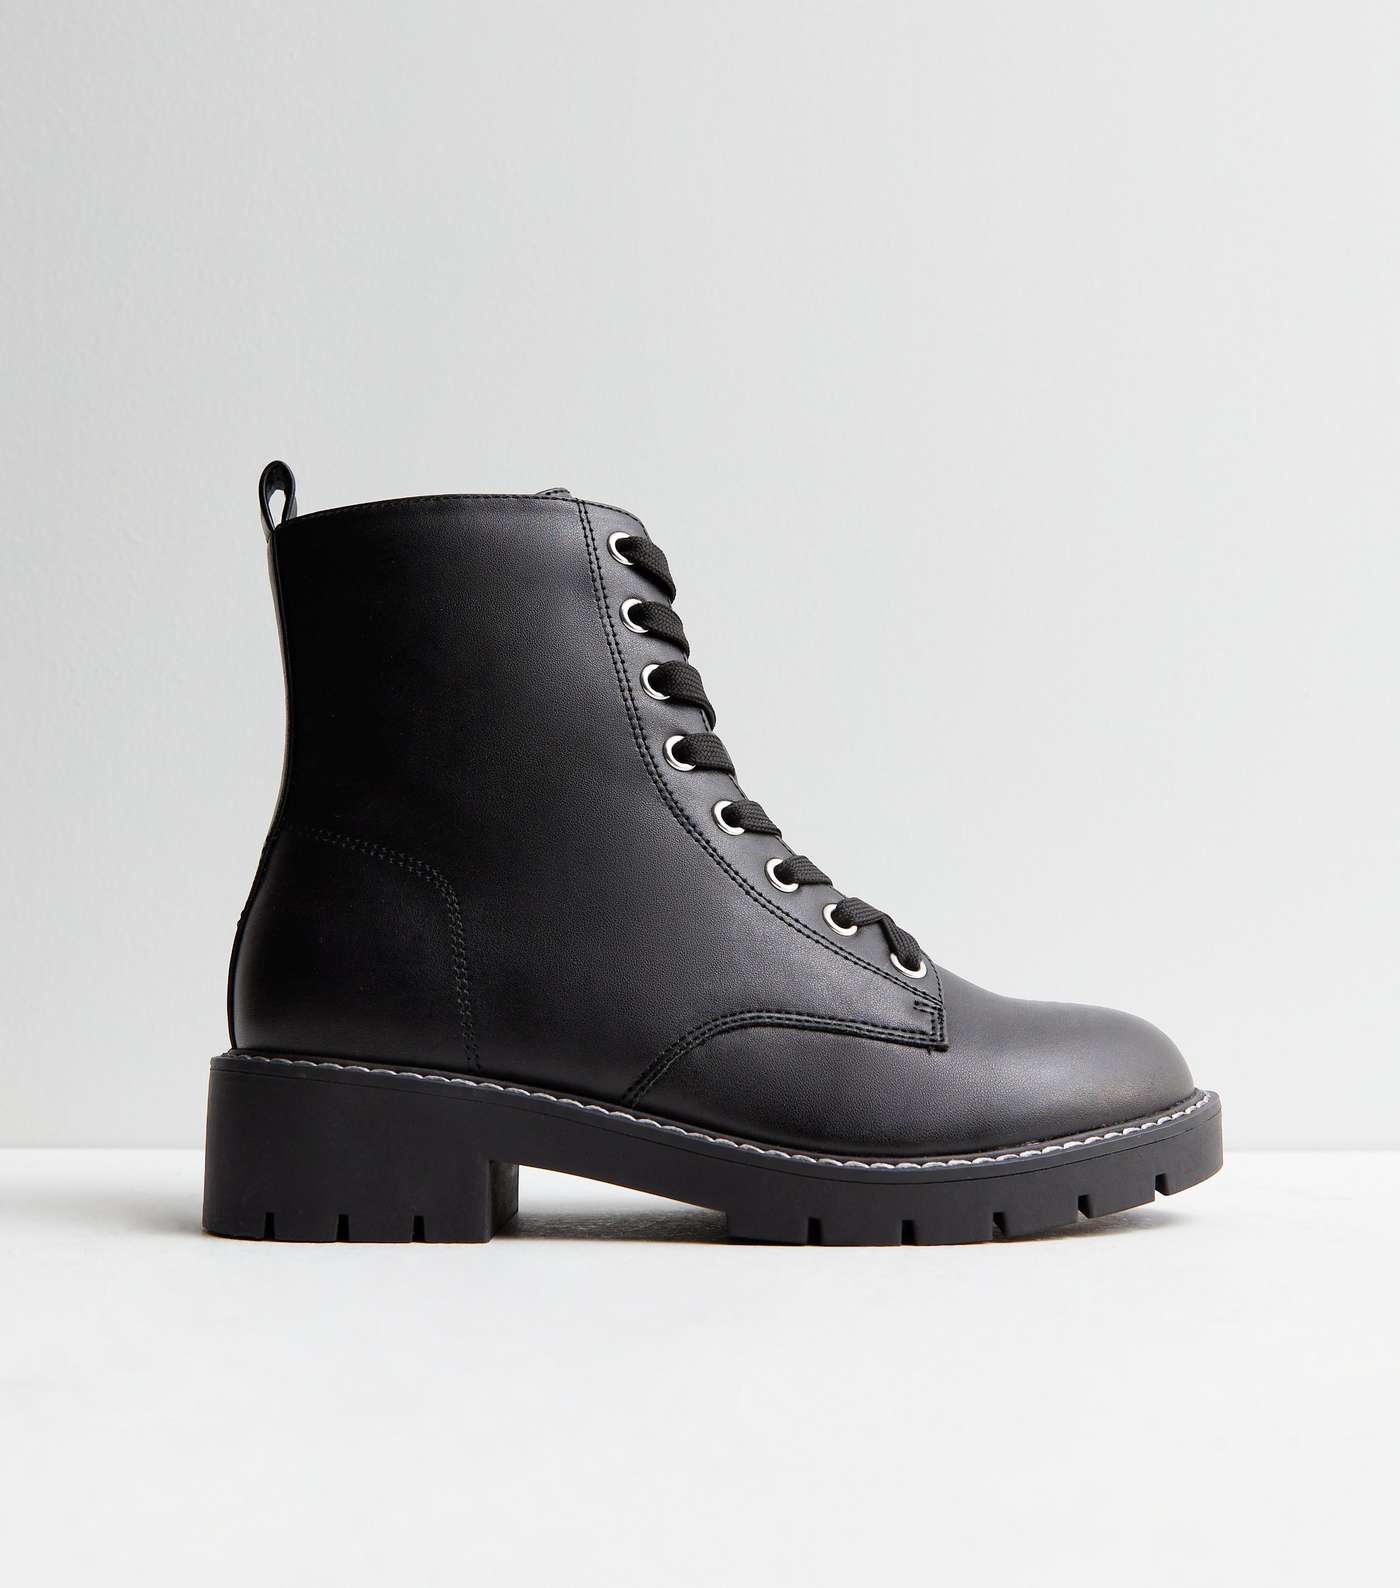 Wide Fit Black Leather-Look Contrast Stitch Lace Up Biker Boots Image 5